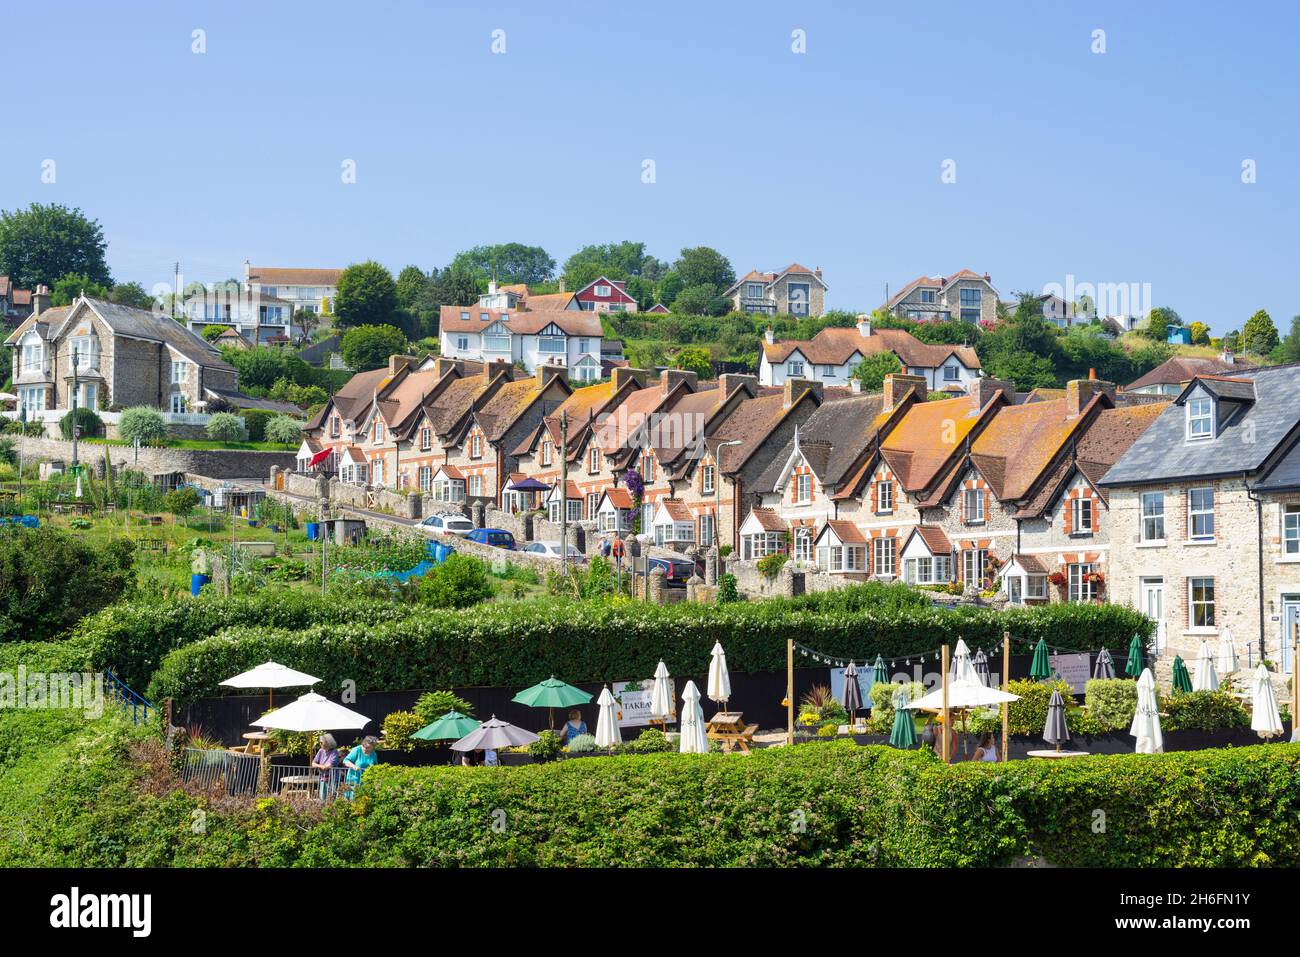 Traditionally built Terraced houses with gardens in front on Common Lane Beer Village centre Beer Devon England UK GB Europe Stock Photo